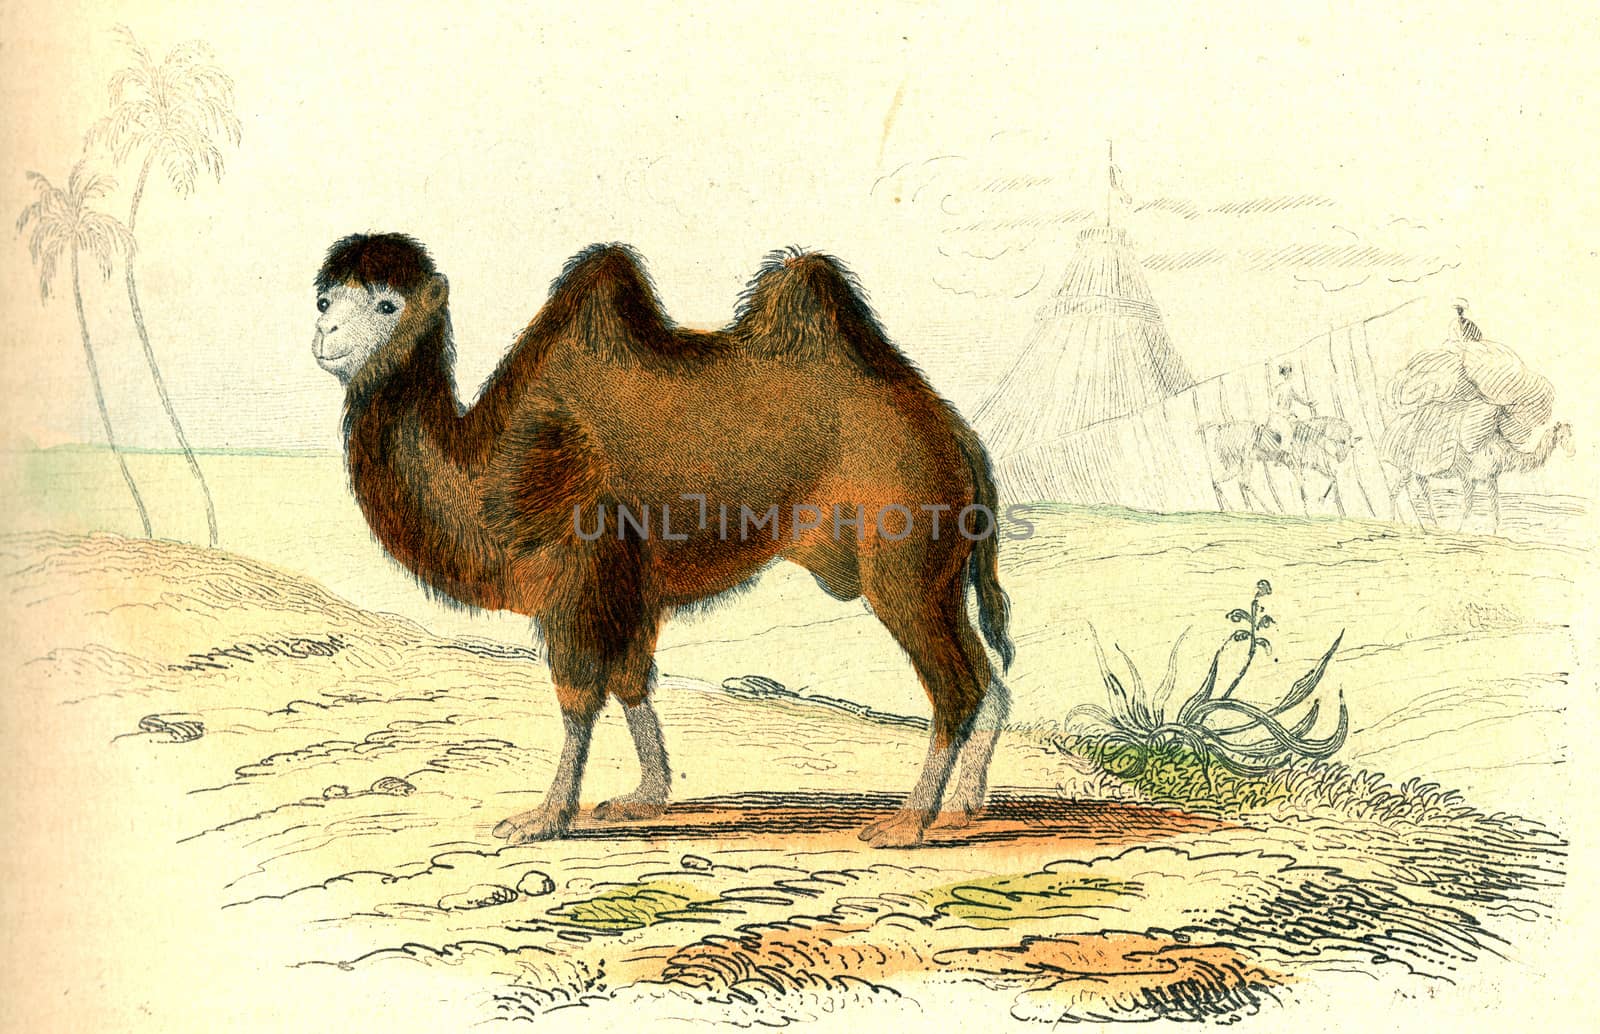 The camel, vintage engraving. by Morphart